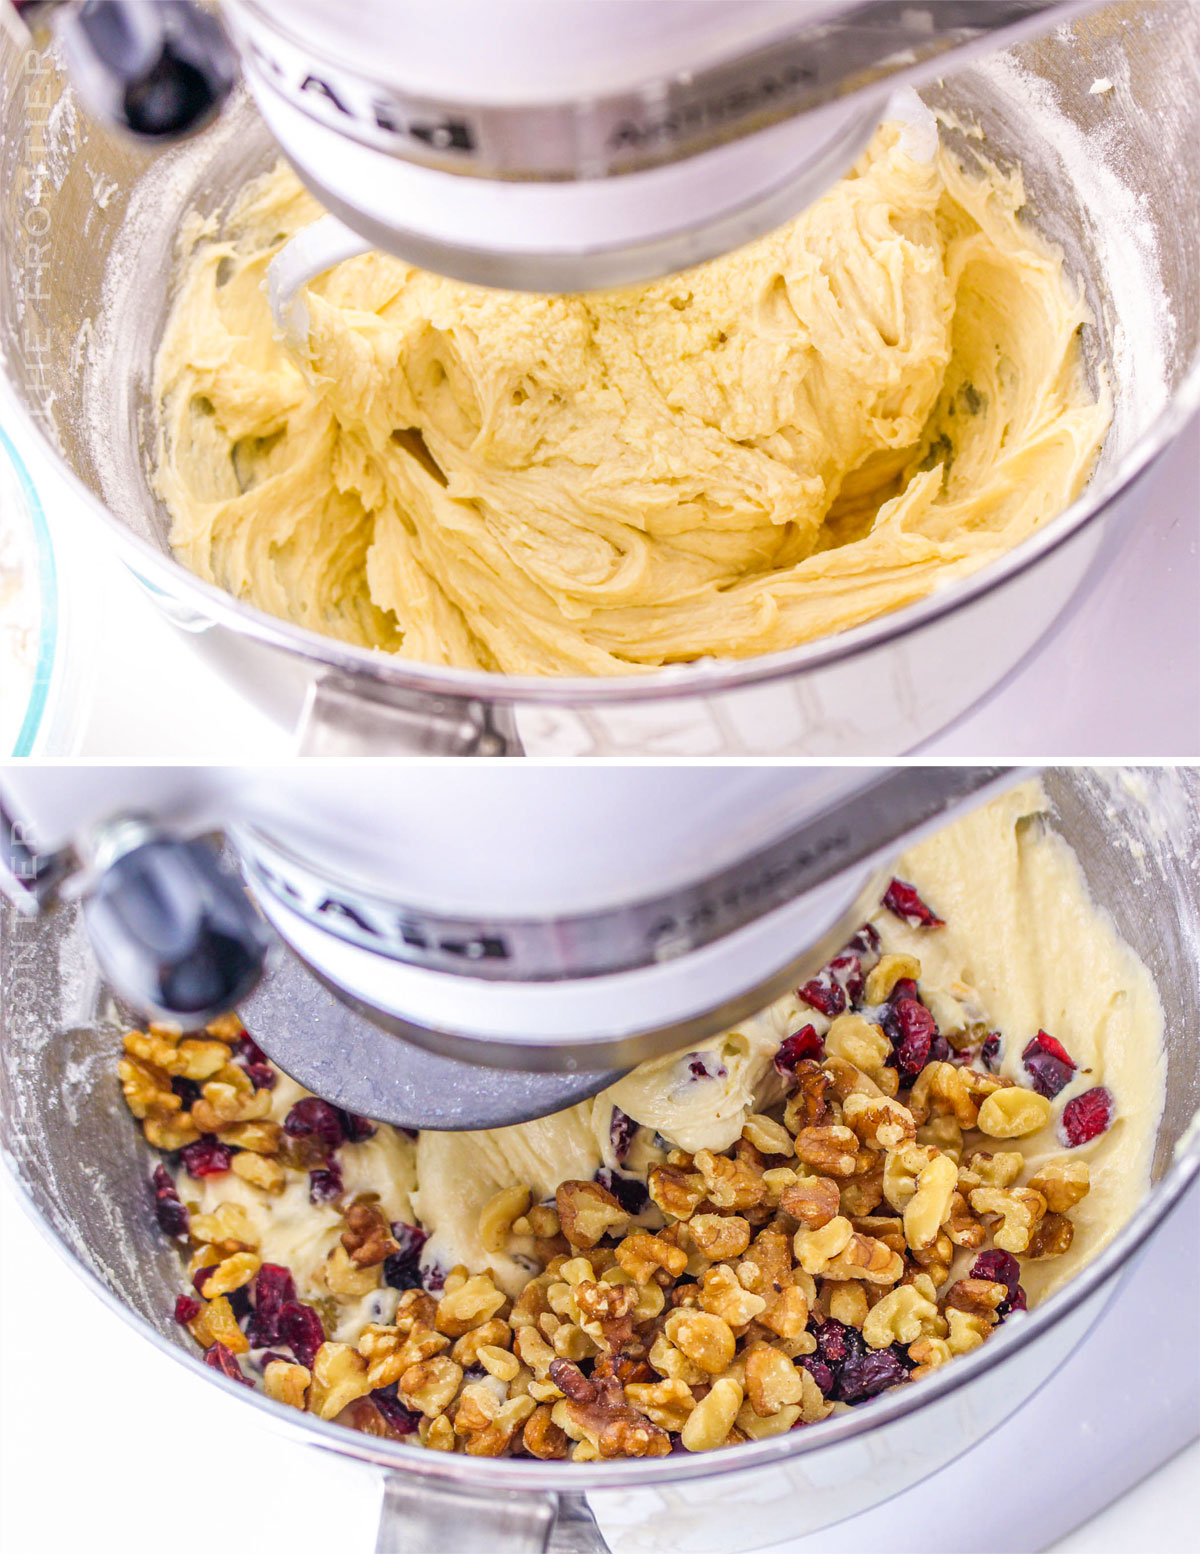 mixing in the nuts and dried fruit